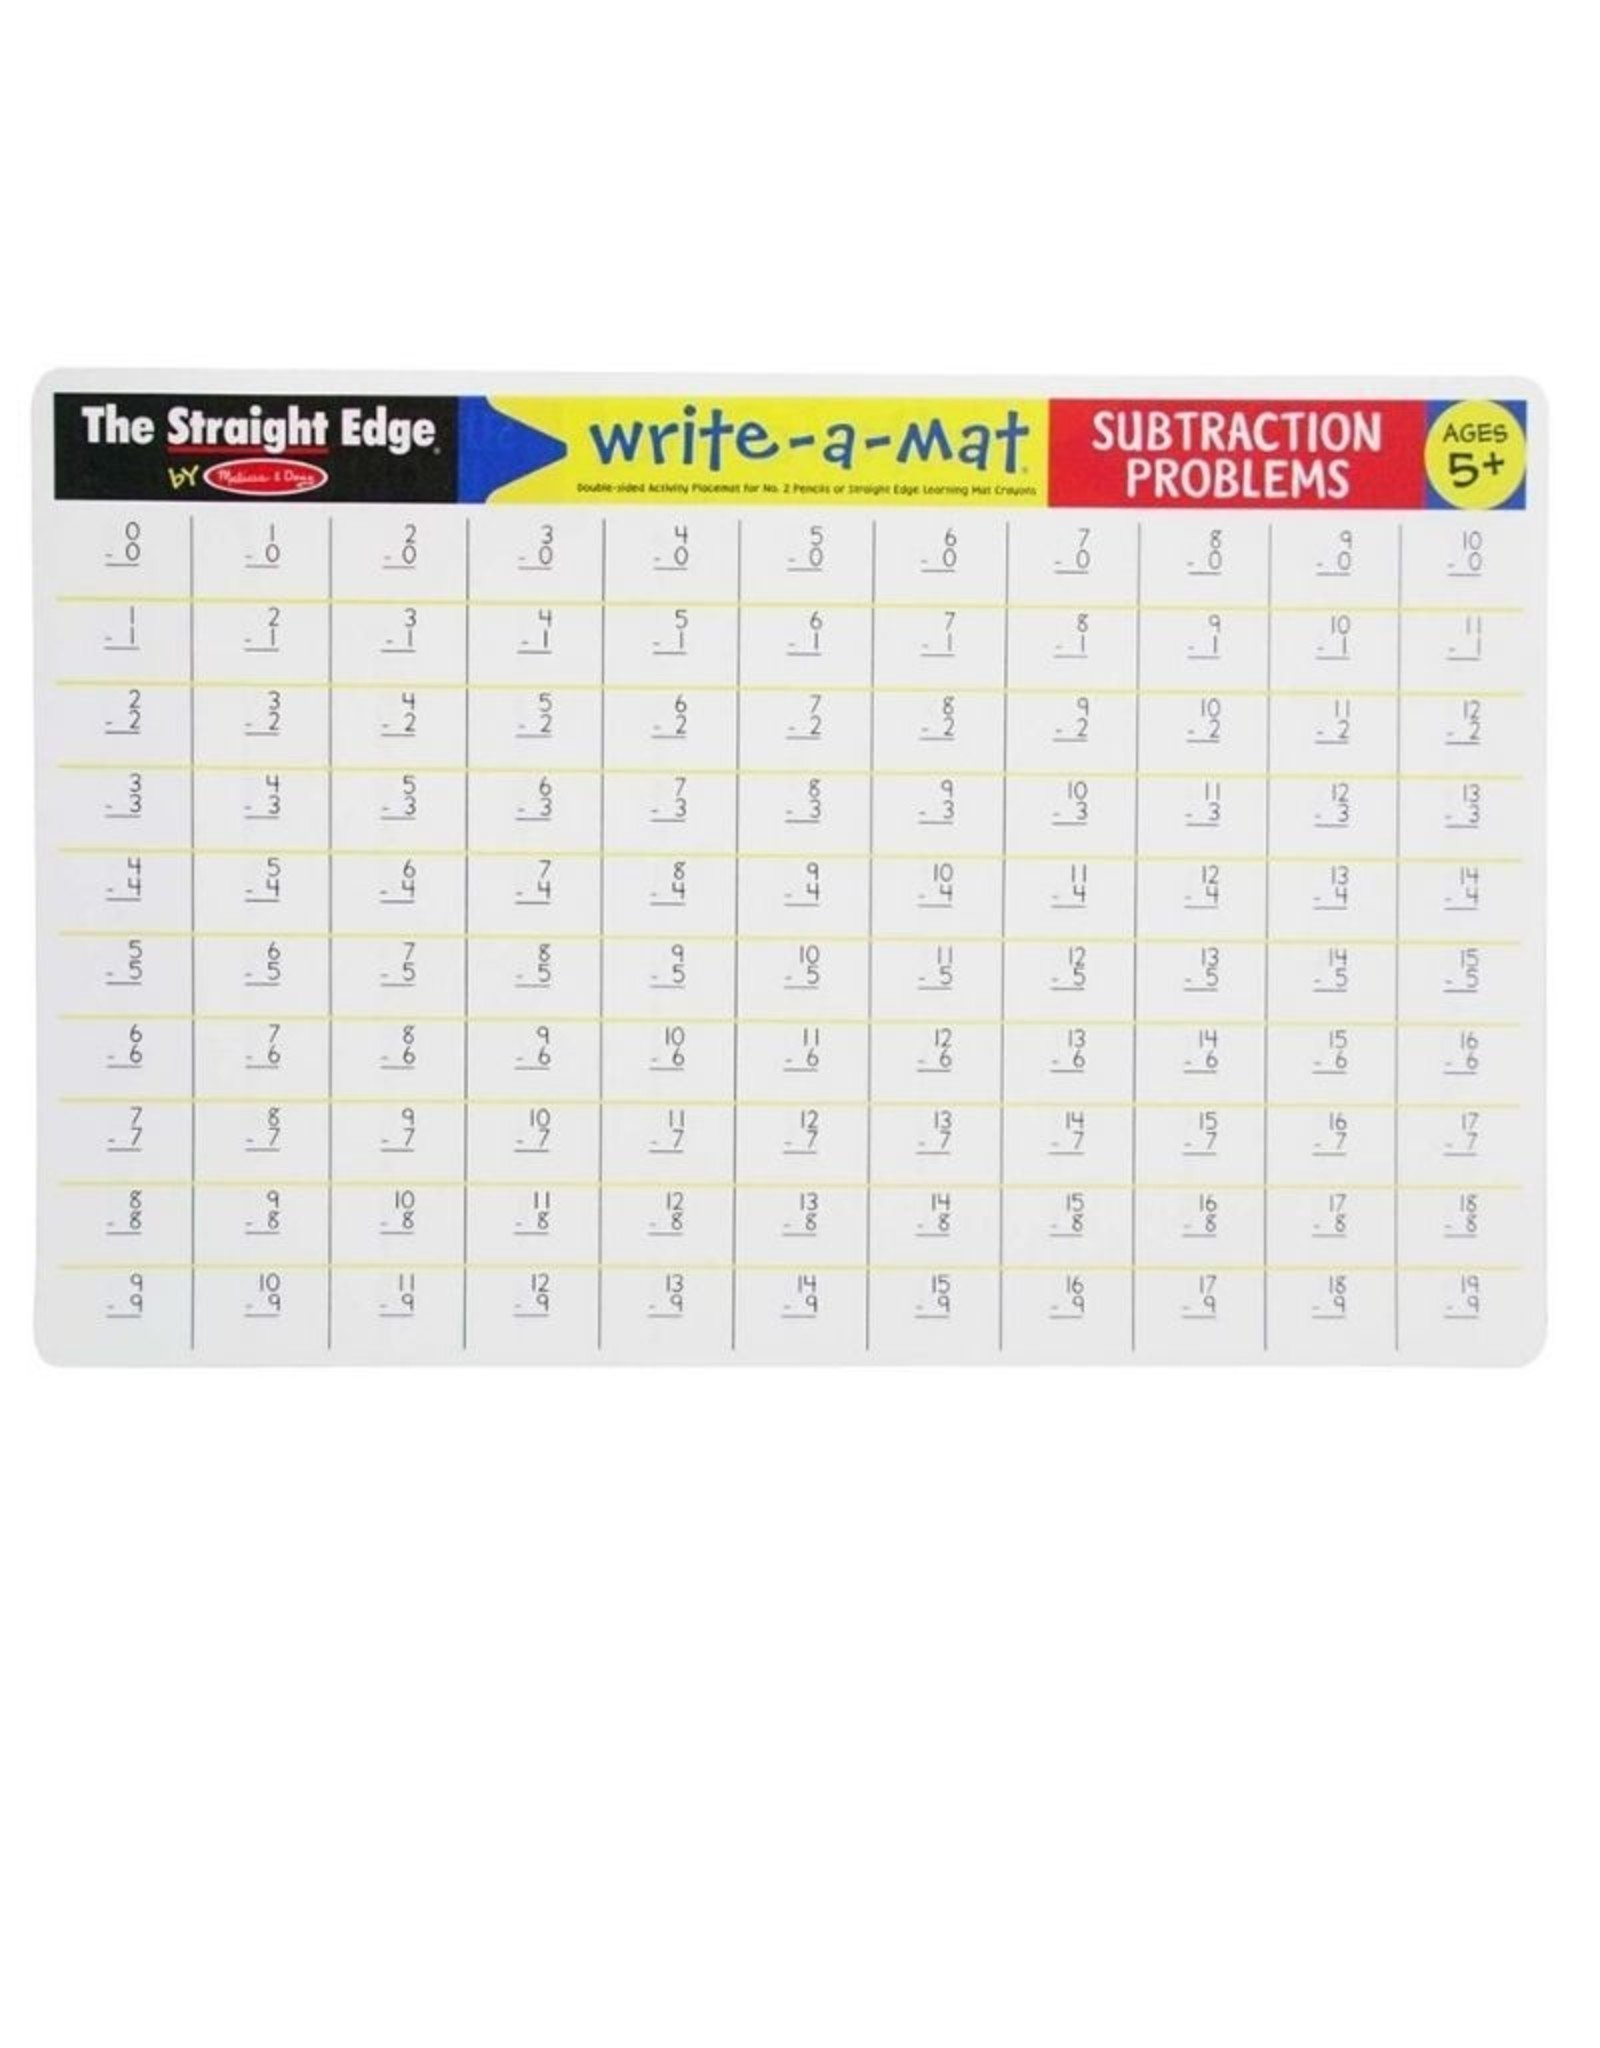 Melissa and Doug Learning Mat - Subtraction Problems